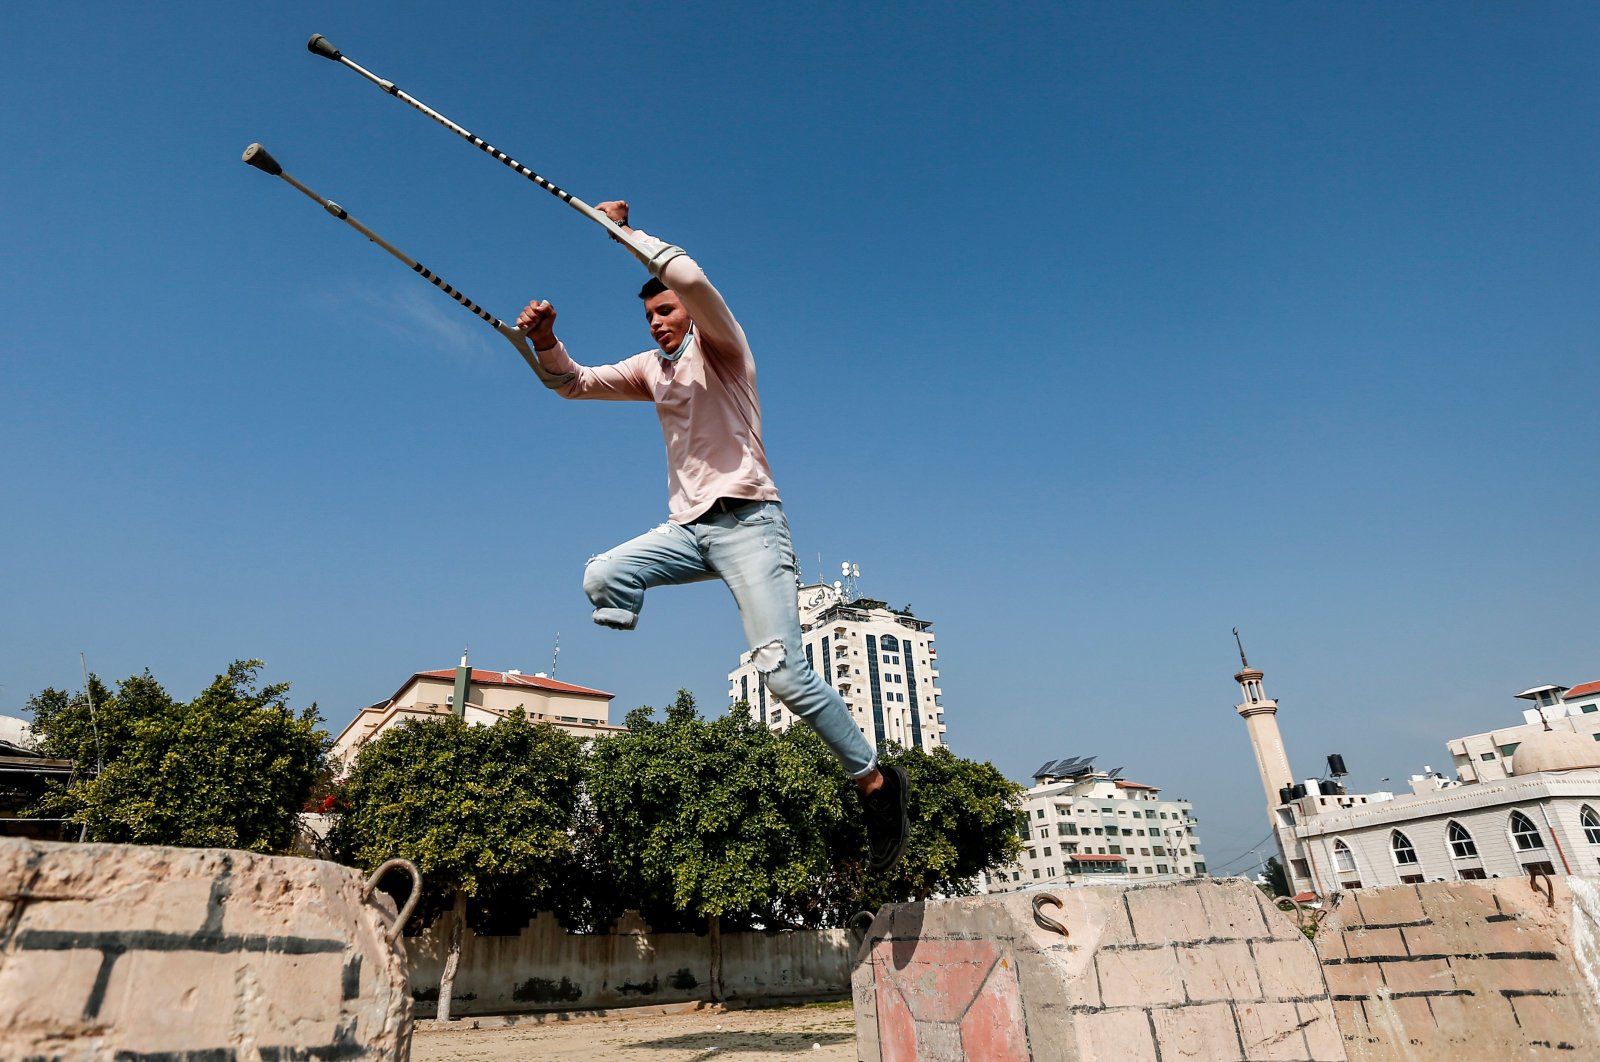 Mohamed Aliwa, a Palestinian youth whose leg was amputated near the knee in 2018 after he was hit by Israeli army fire during protests along the fortified border separating the Gaza Strip from Israel, shows off his parkour skills despite his disability and while on crutches in Gaza City, Jan. 4, 2021. (AFP Photo)